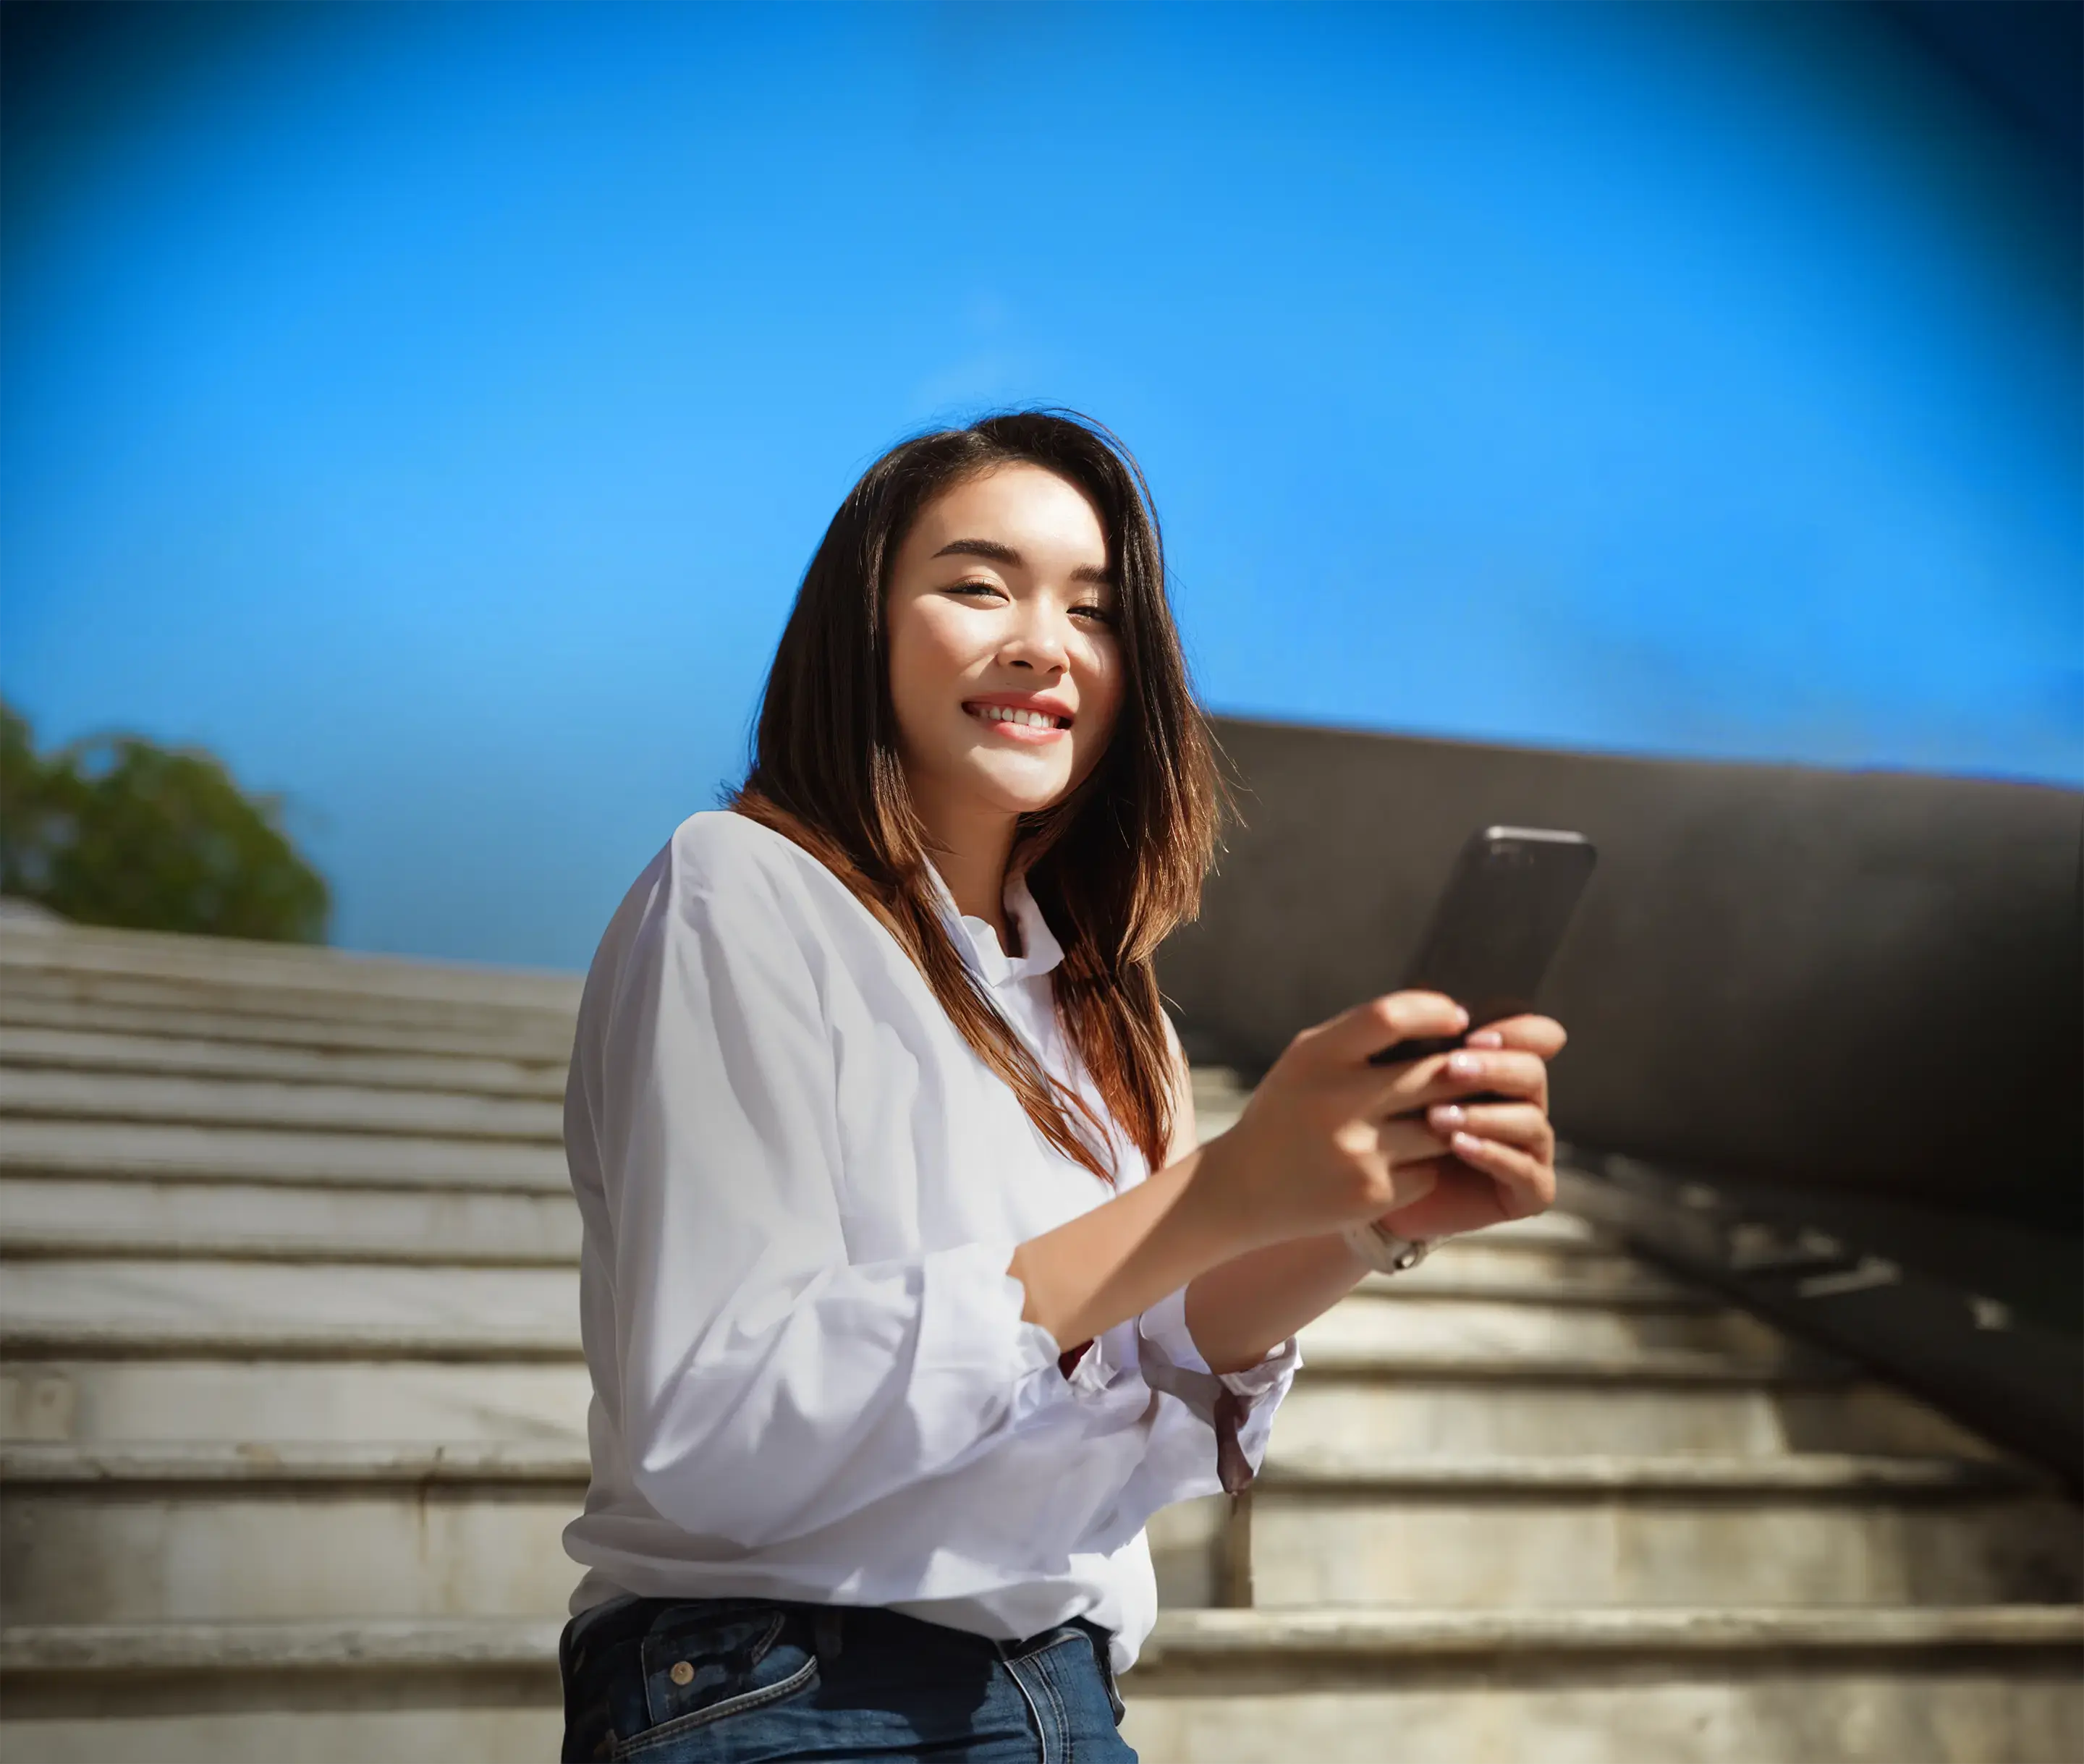 She was impressed because she uses Thaibulksms multi-channel communication platform that can send messages through all channels such as SMS, Email or LON.